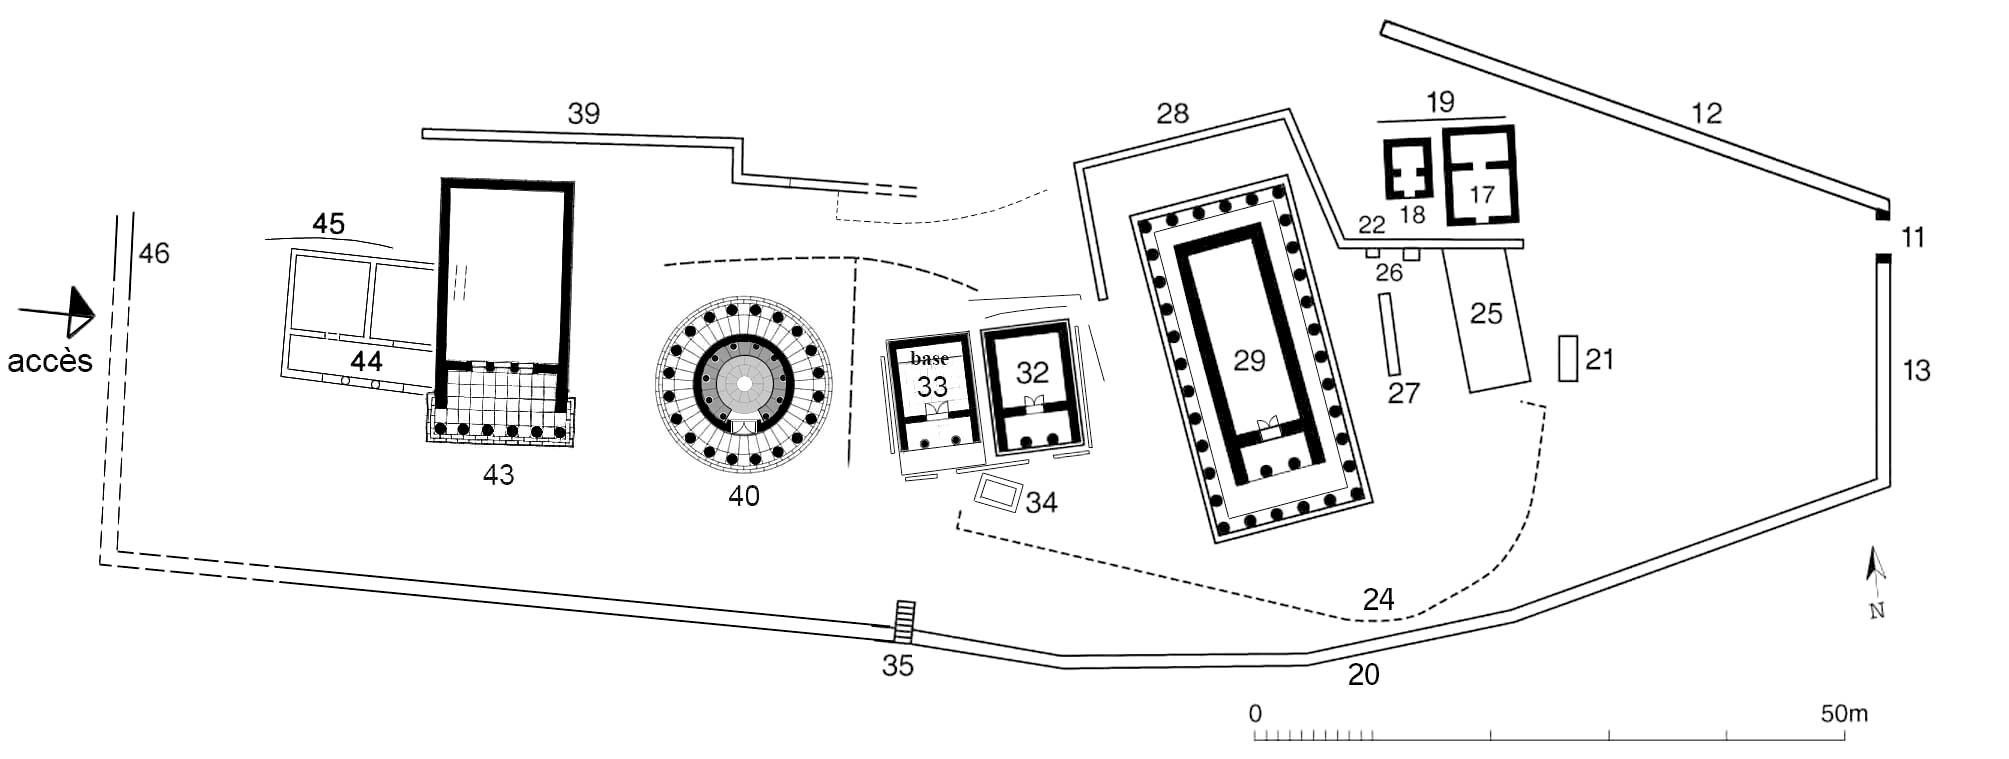 Fig. 3. Reconstructed plan of the sanctuary of Athena (EFA/Y. Fomine, D. Laroche, 2015).